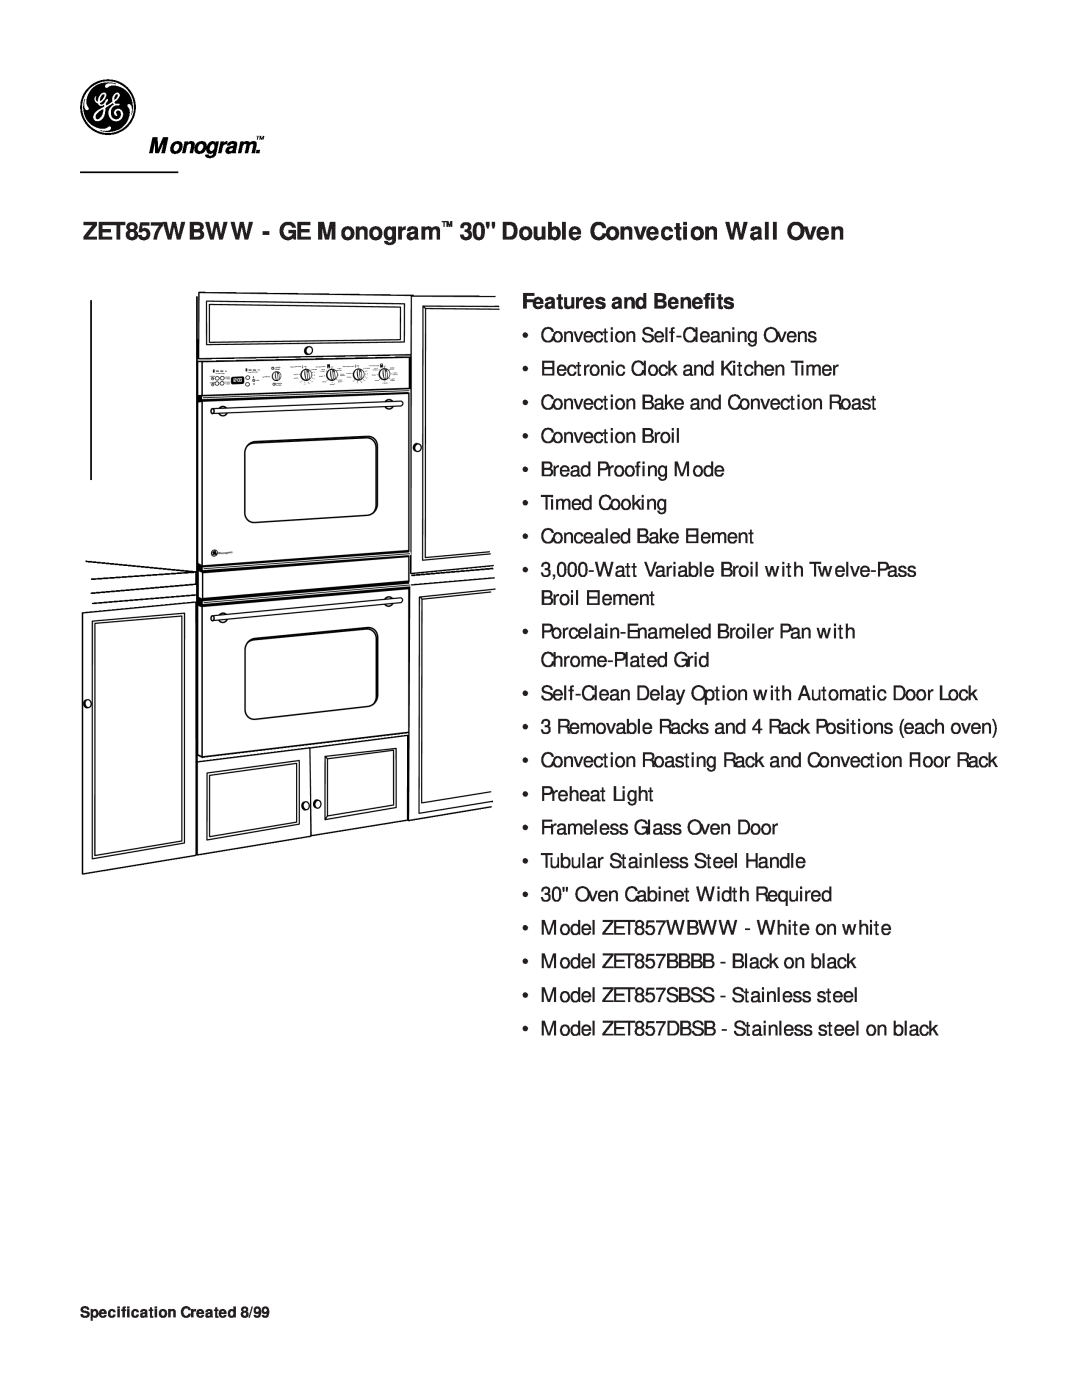 GE Monogram dimensions ZET857WBWW - GE Monogram 30 Double Convection Wall Oven, Features and Benefits 